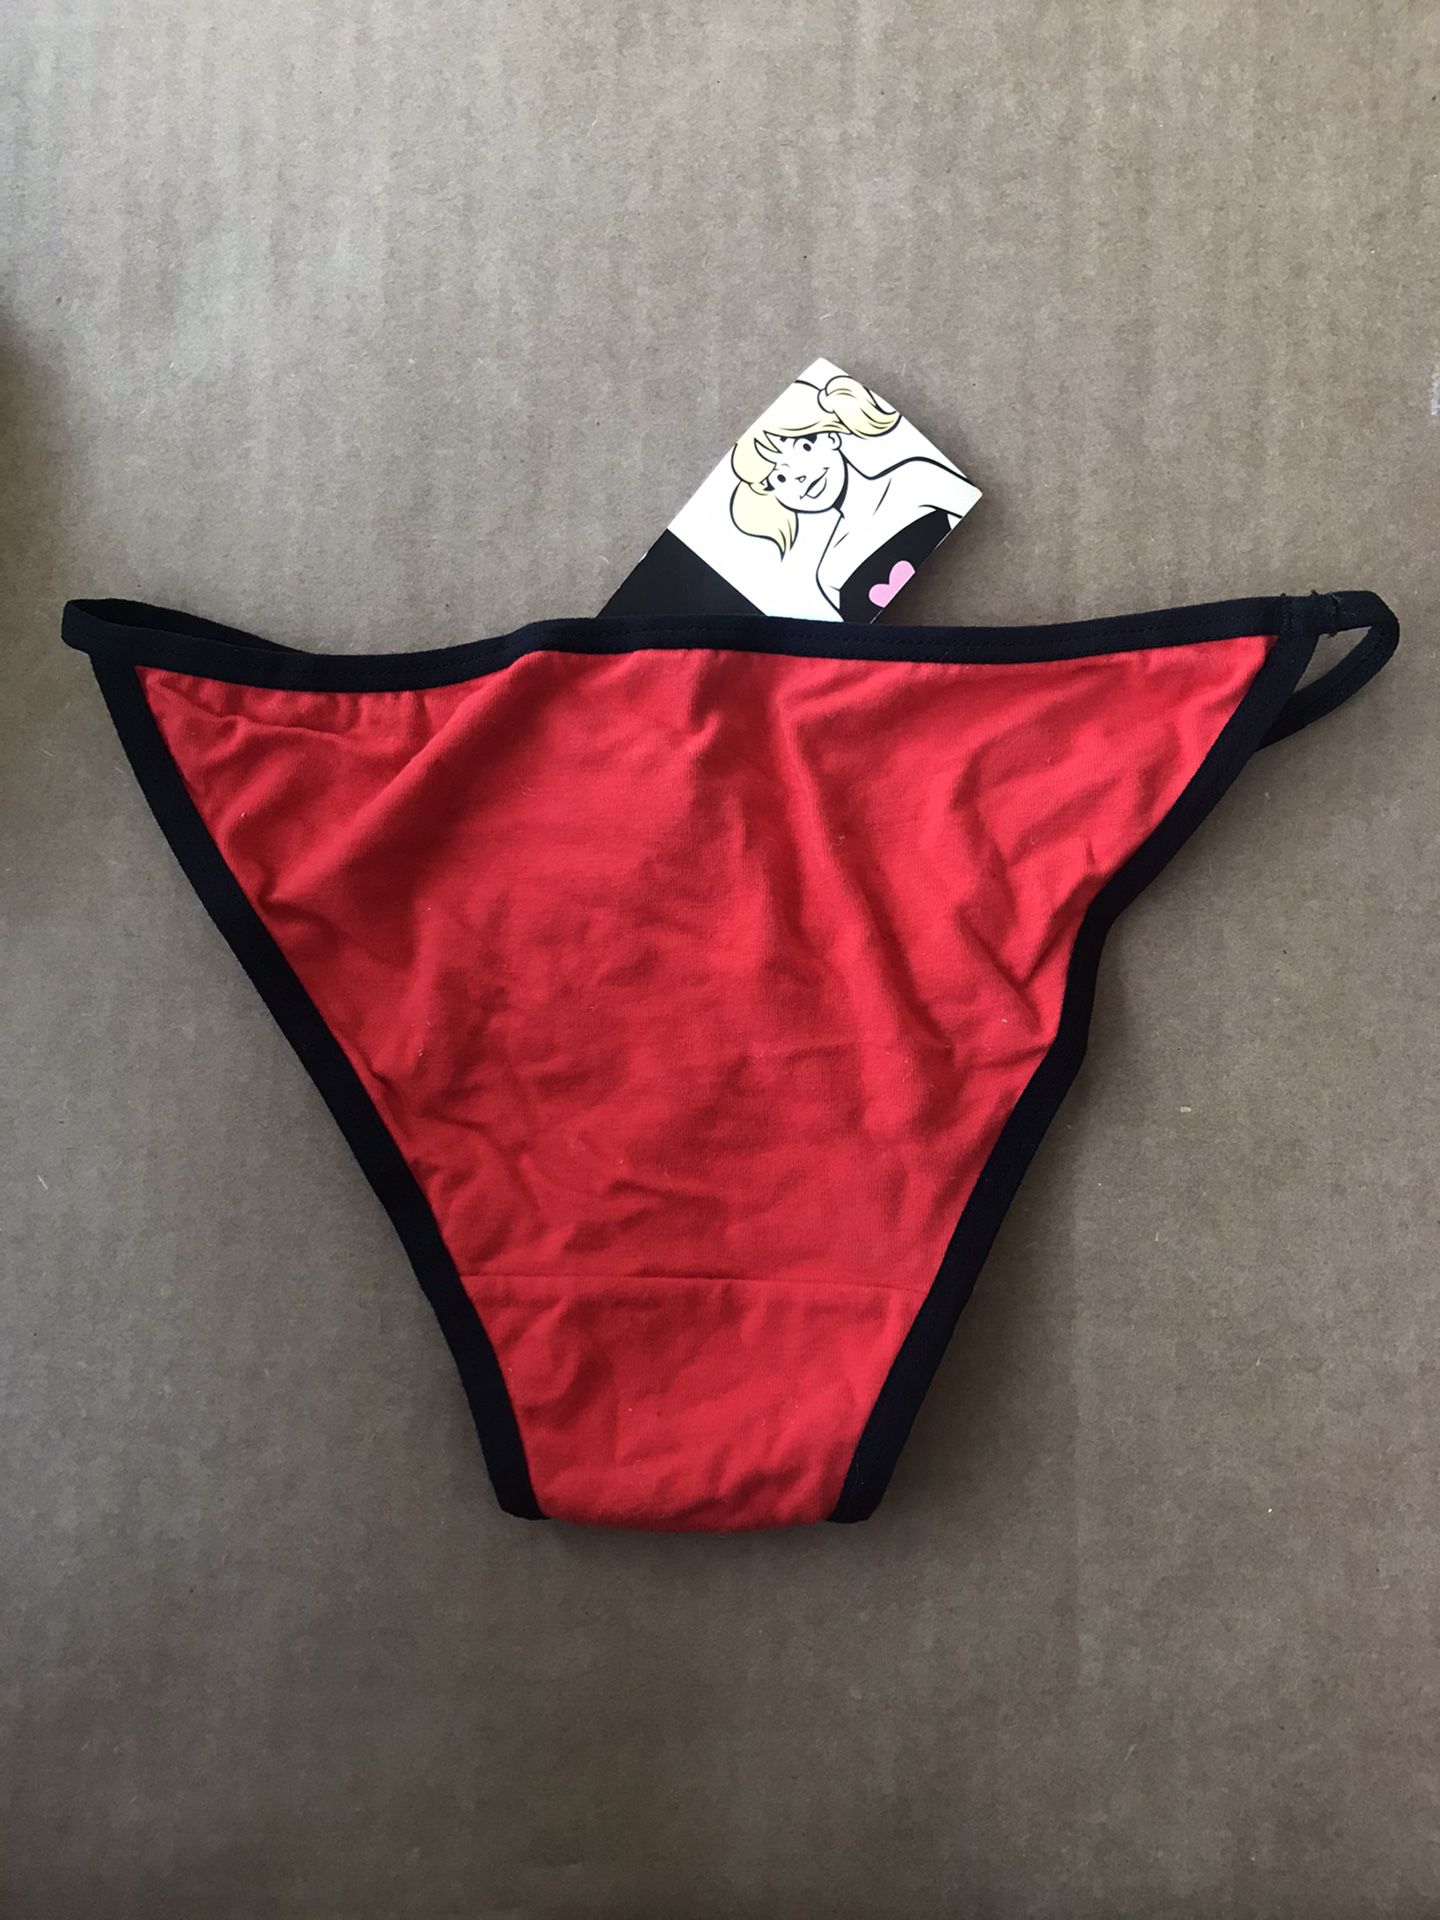 Women’s Panties for Sale in Lincolnwood, IL - OfferUp